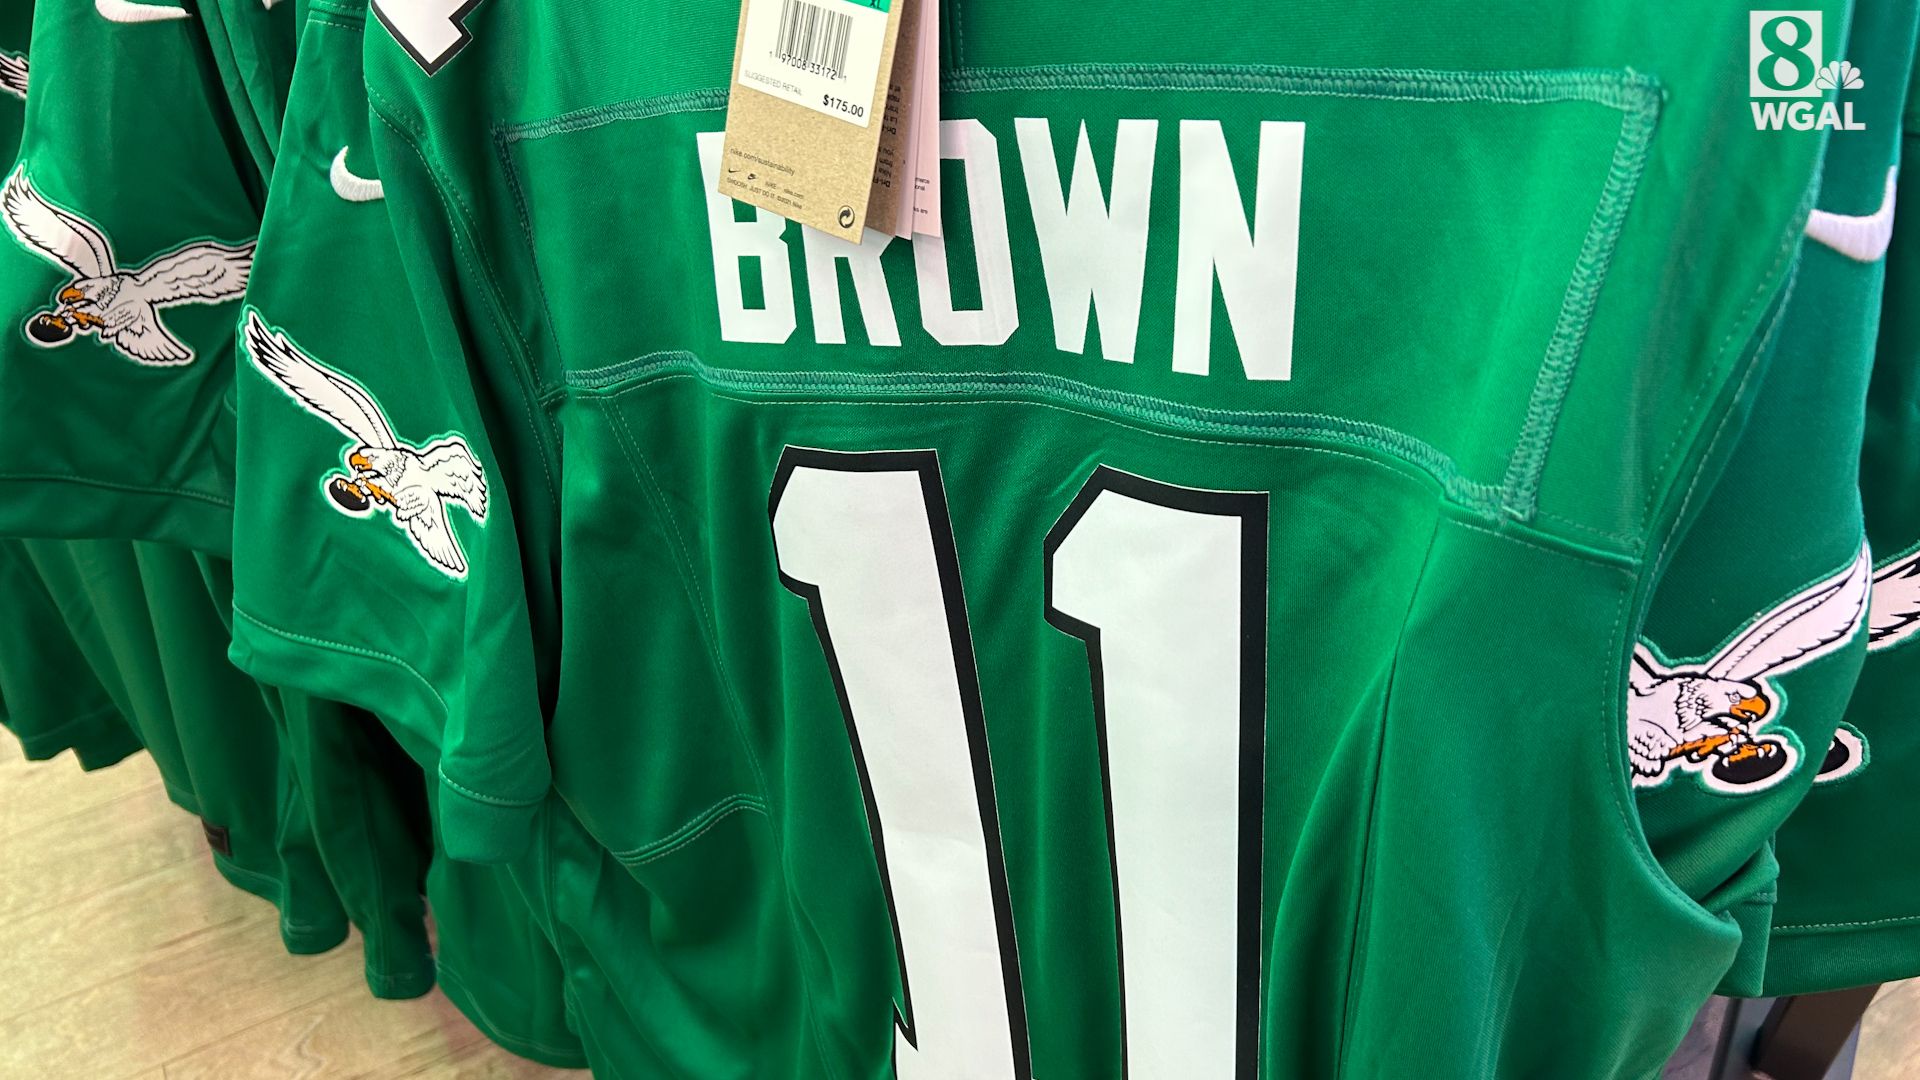 Will we see the Eagles use their kelly green and black jerseys in